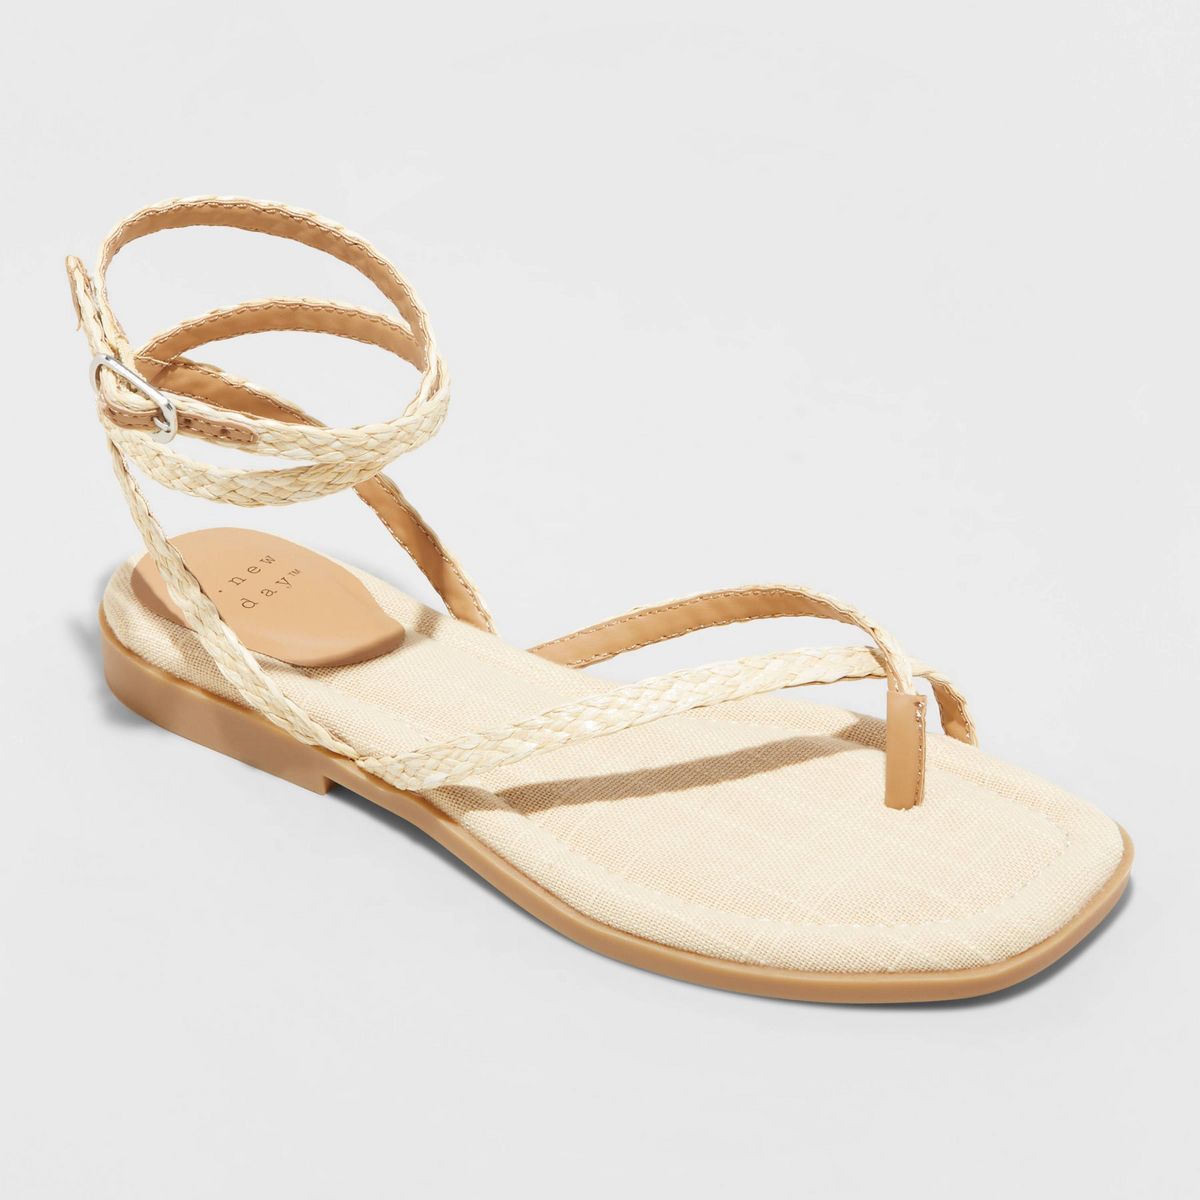 Women's Luisa Ankle Strap Thong Sandals - A New Day™ Beige 9 | Target